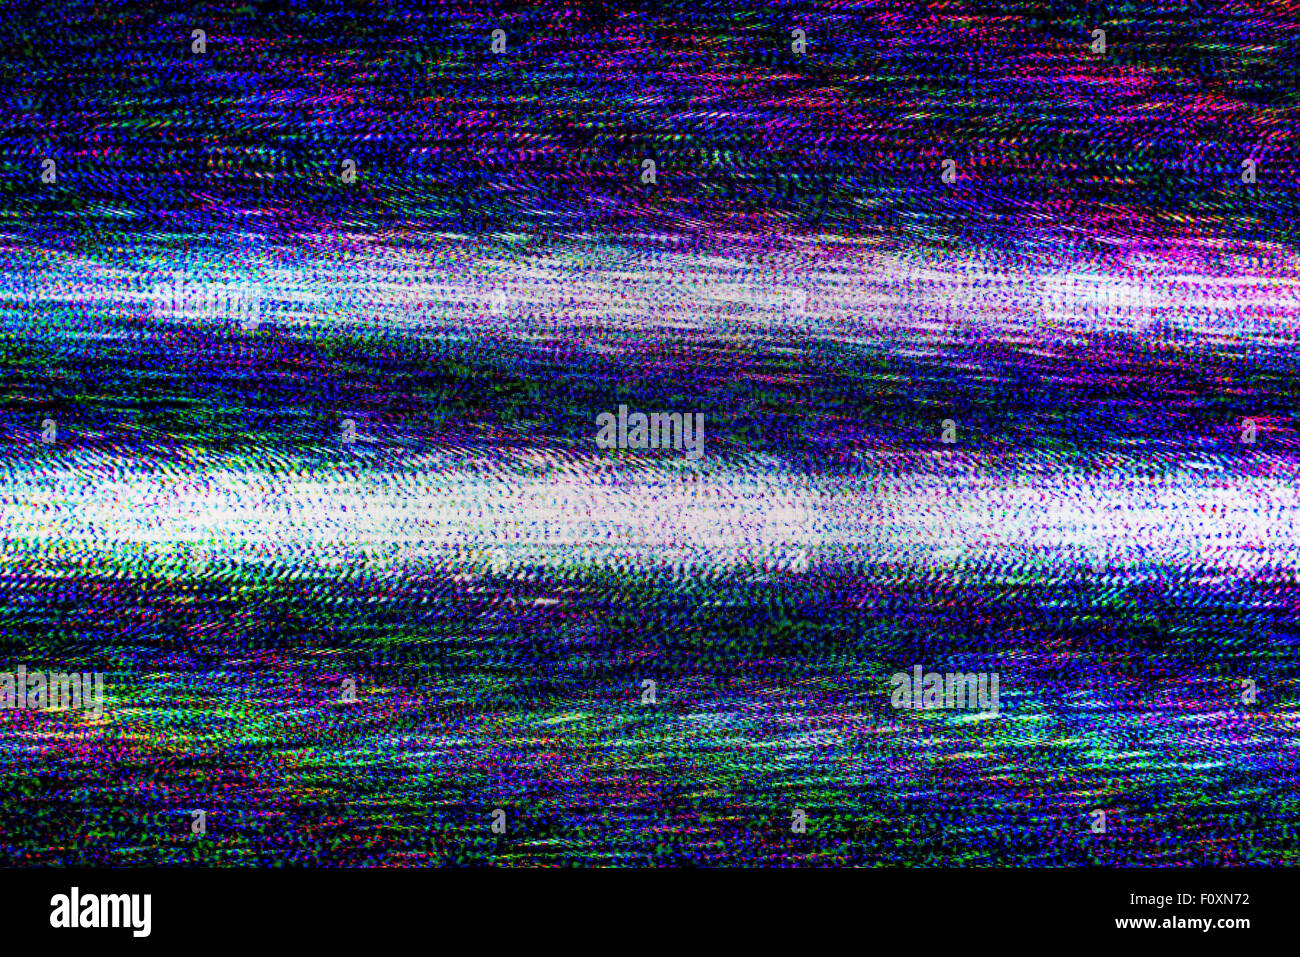 TV damage, bad sync TV channel, RGB LCD television screen with static noise from poor broadcast signal reception Stock Photo